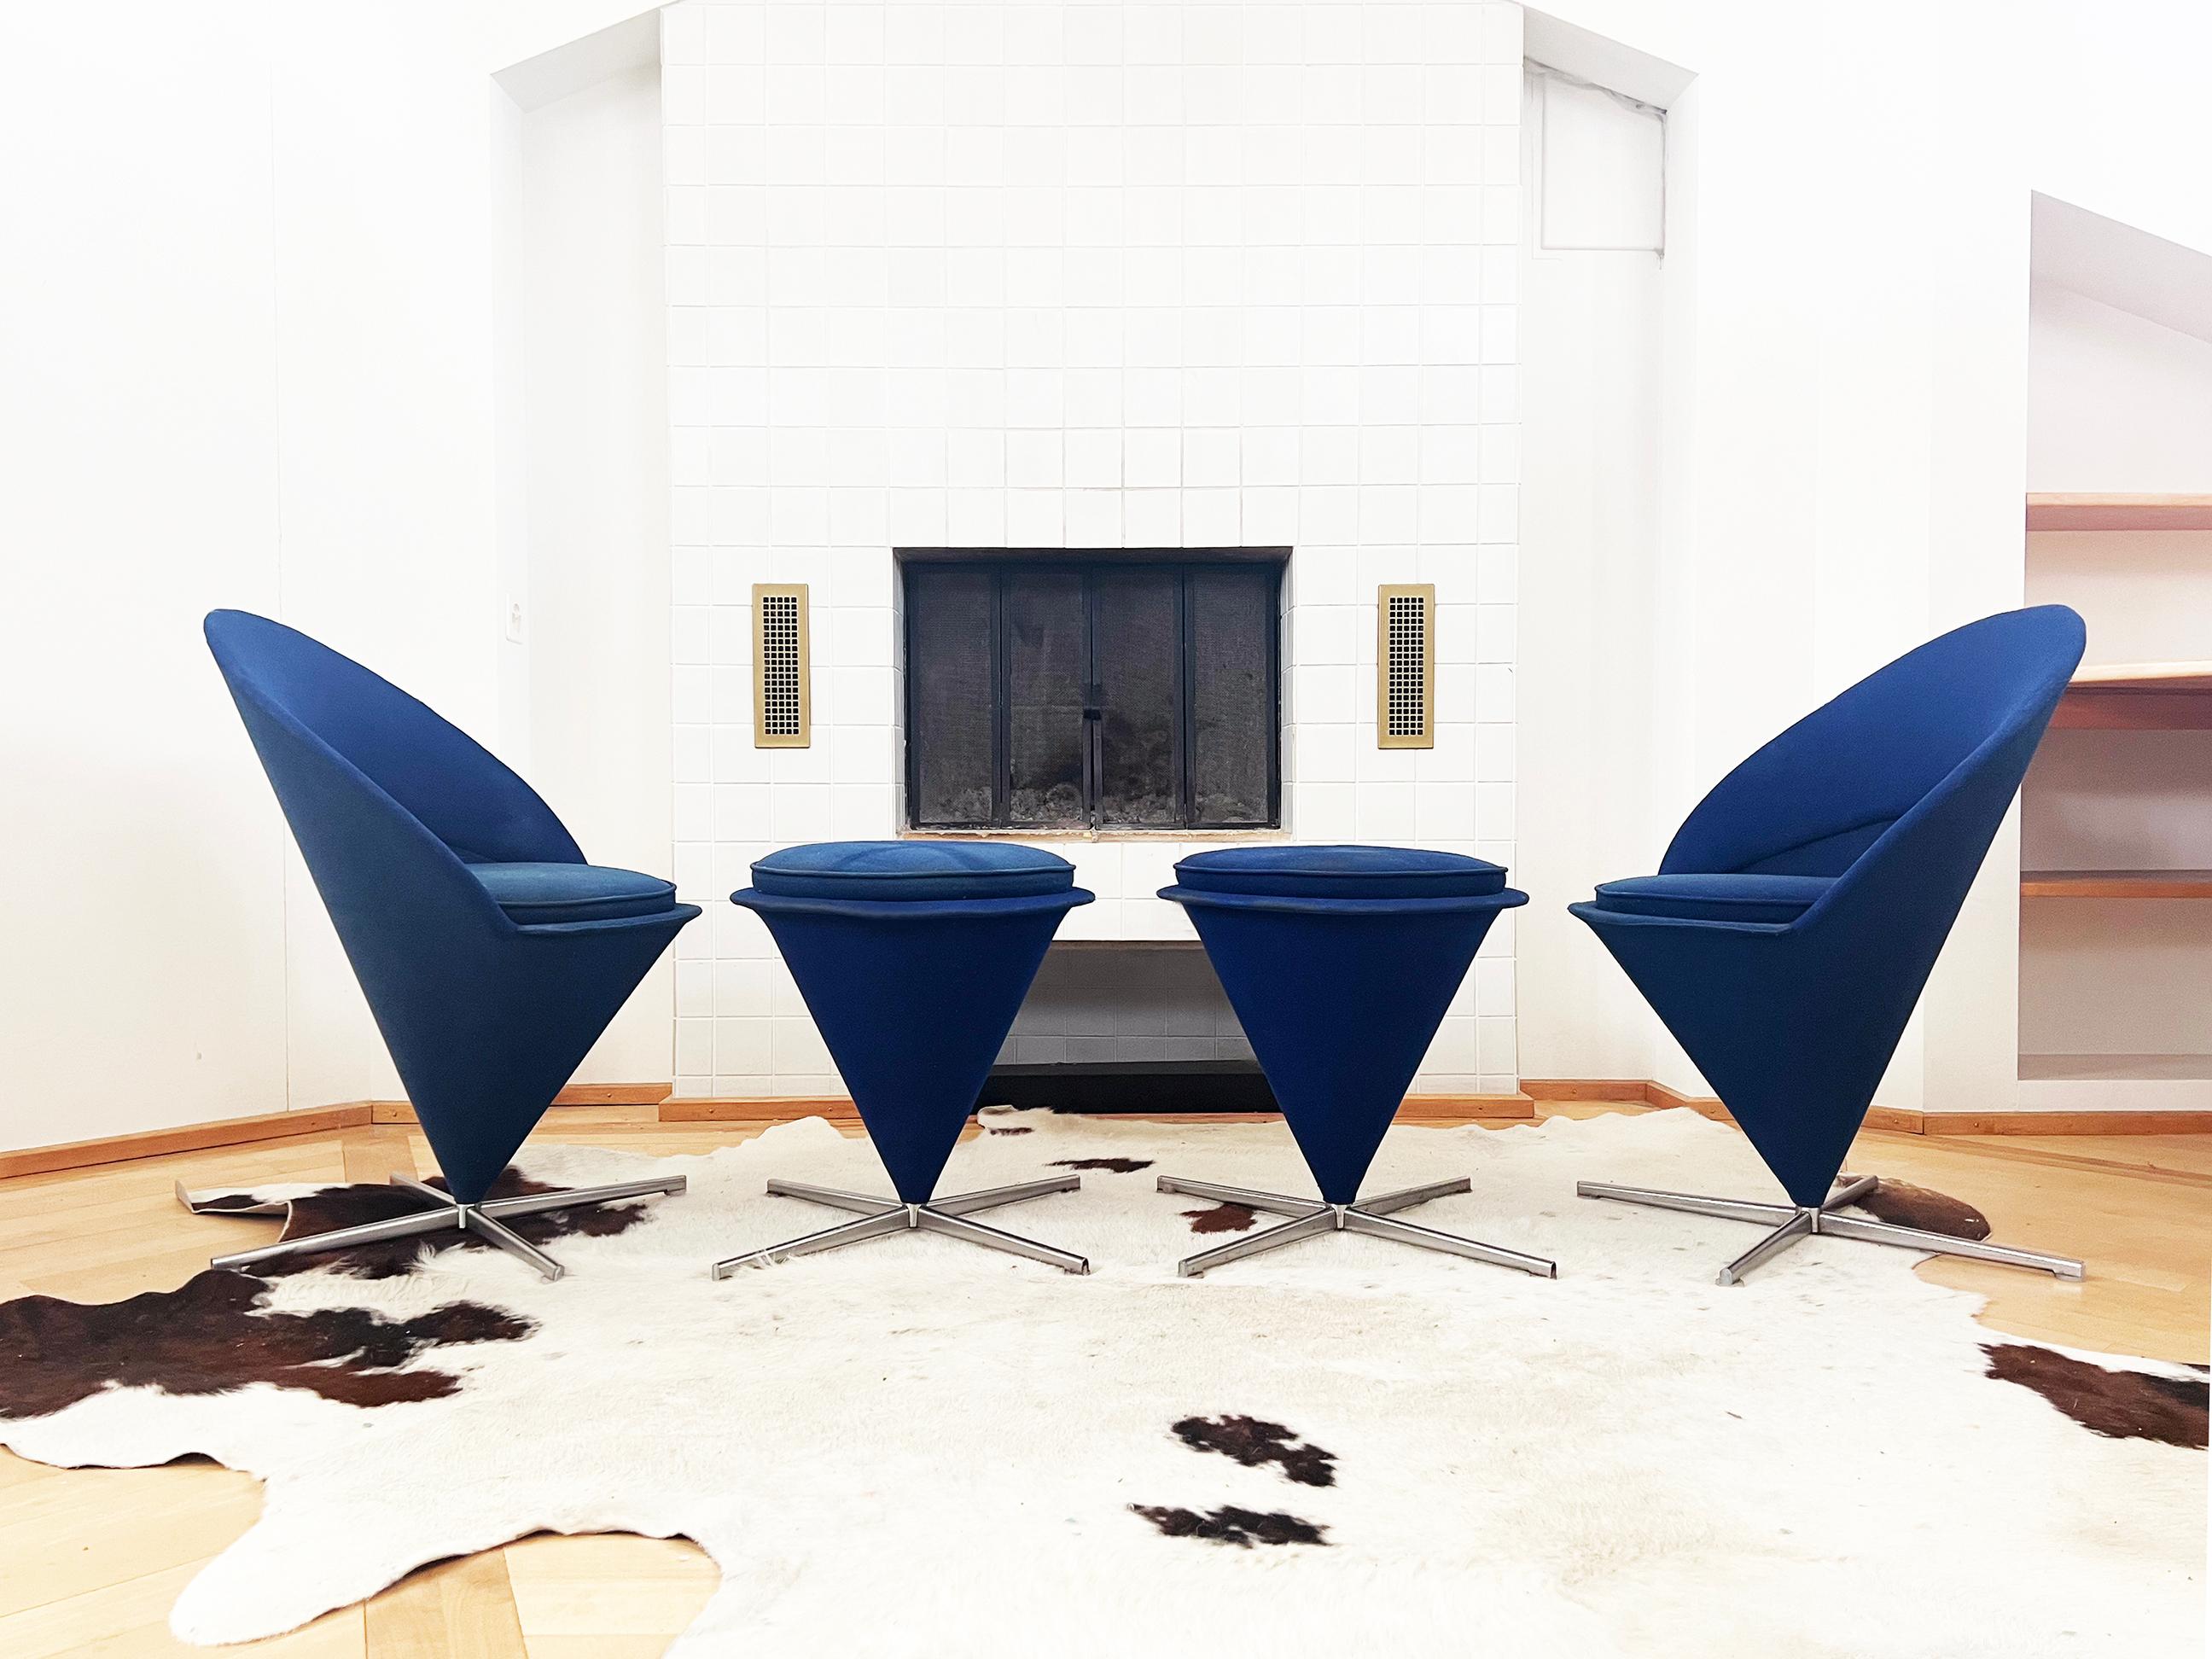 Original Verner Panton Ottoman, suited to fit with the Panton Chair, produced by Vitra.  Beautiful and rare piece.

This is the iconic Verner Panton chair ottoman in the shape of a cone, upholstered in blue wool and featuring a swivel four-pass